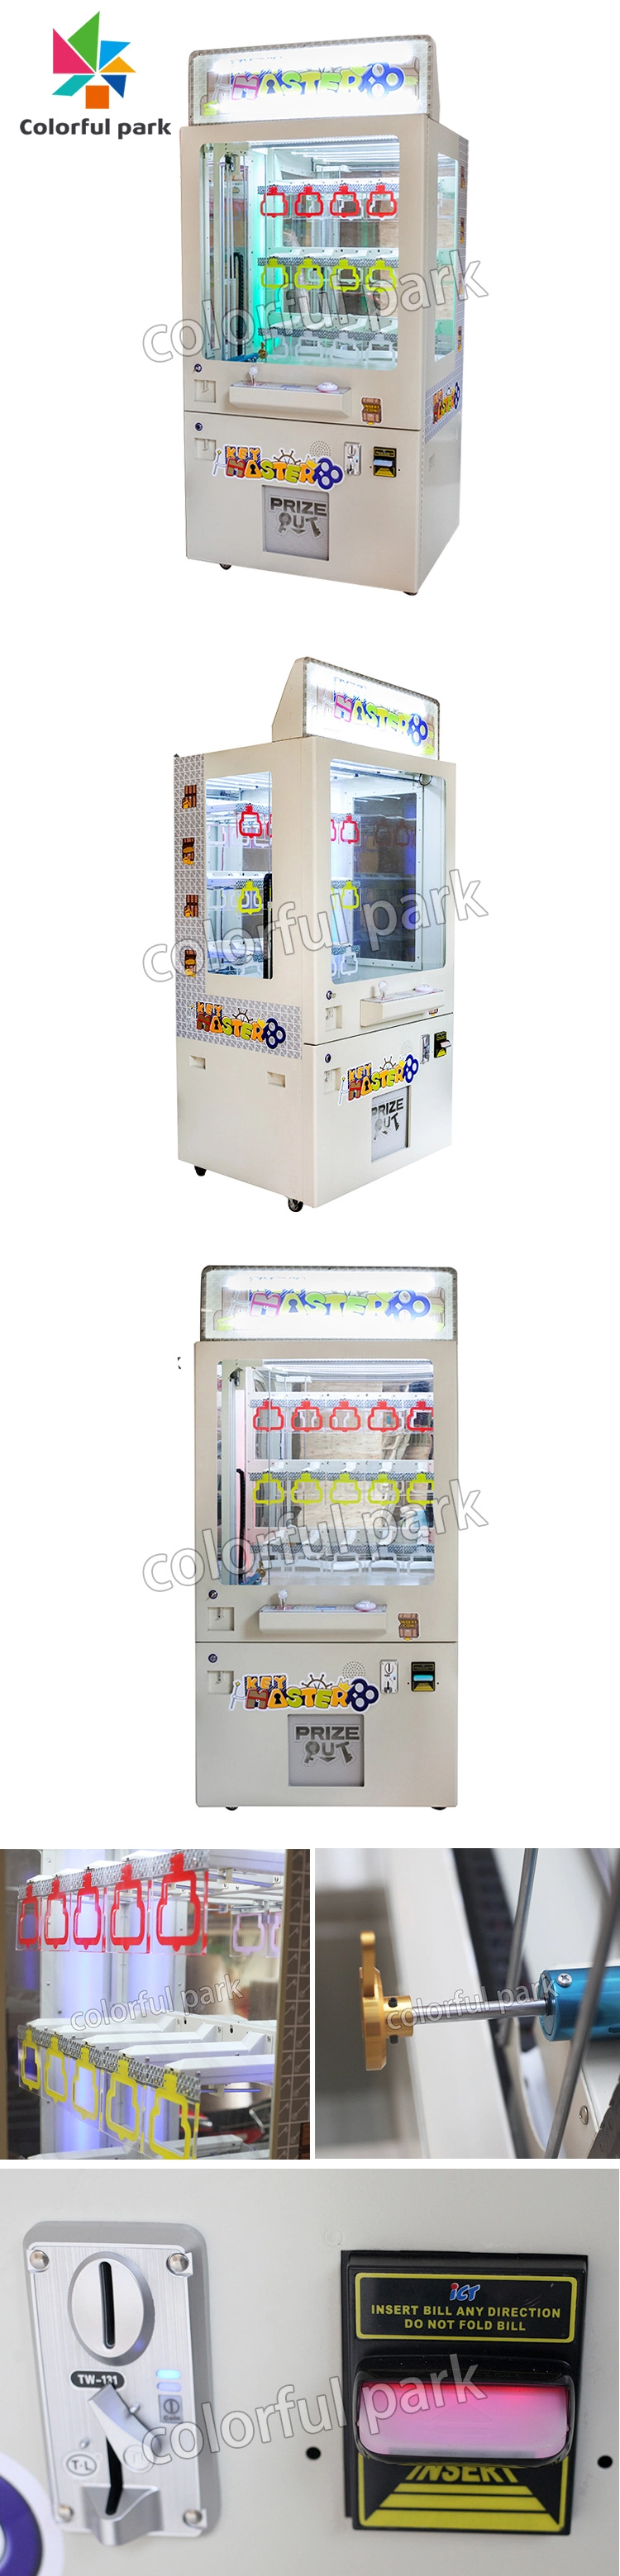 Coin Operated Game Arcade Game Machine Key Master Game